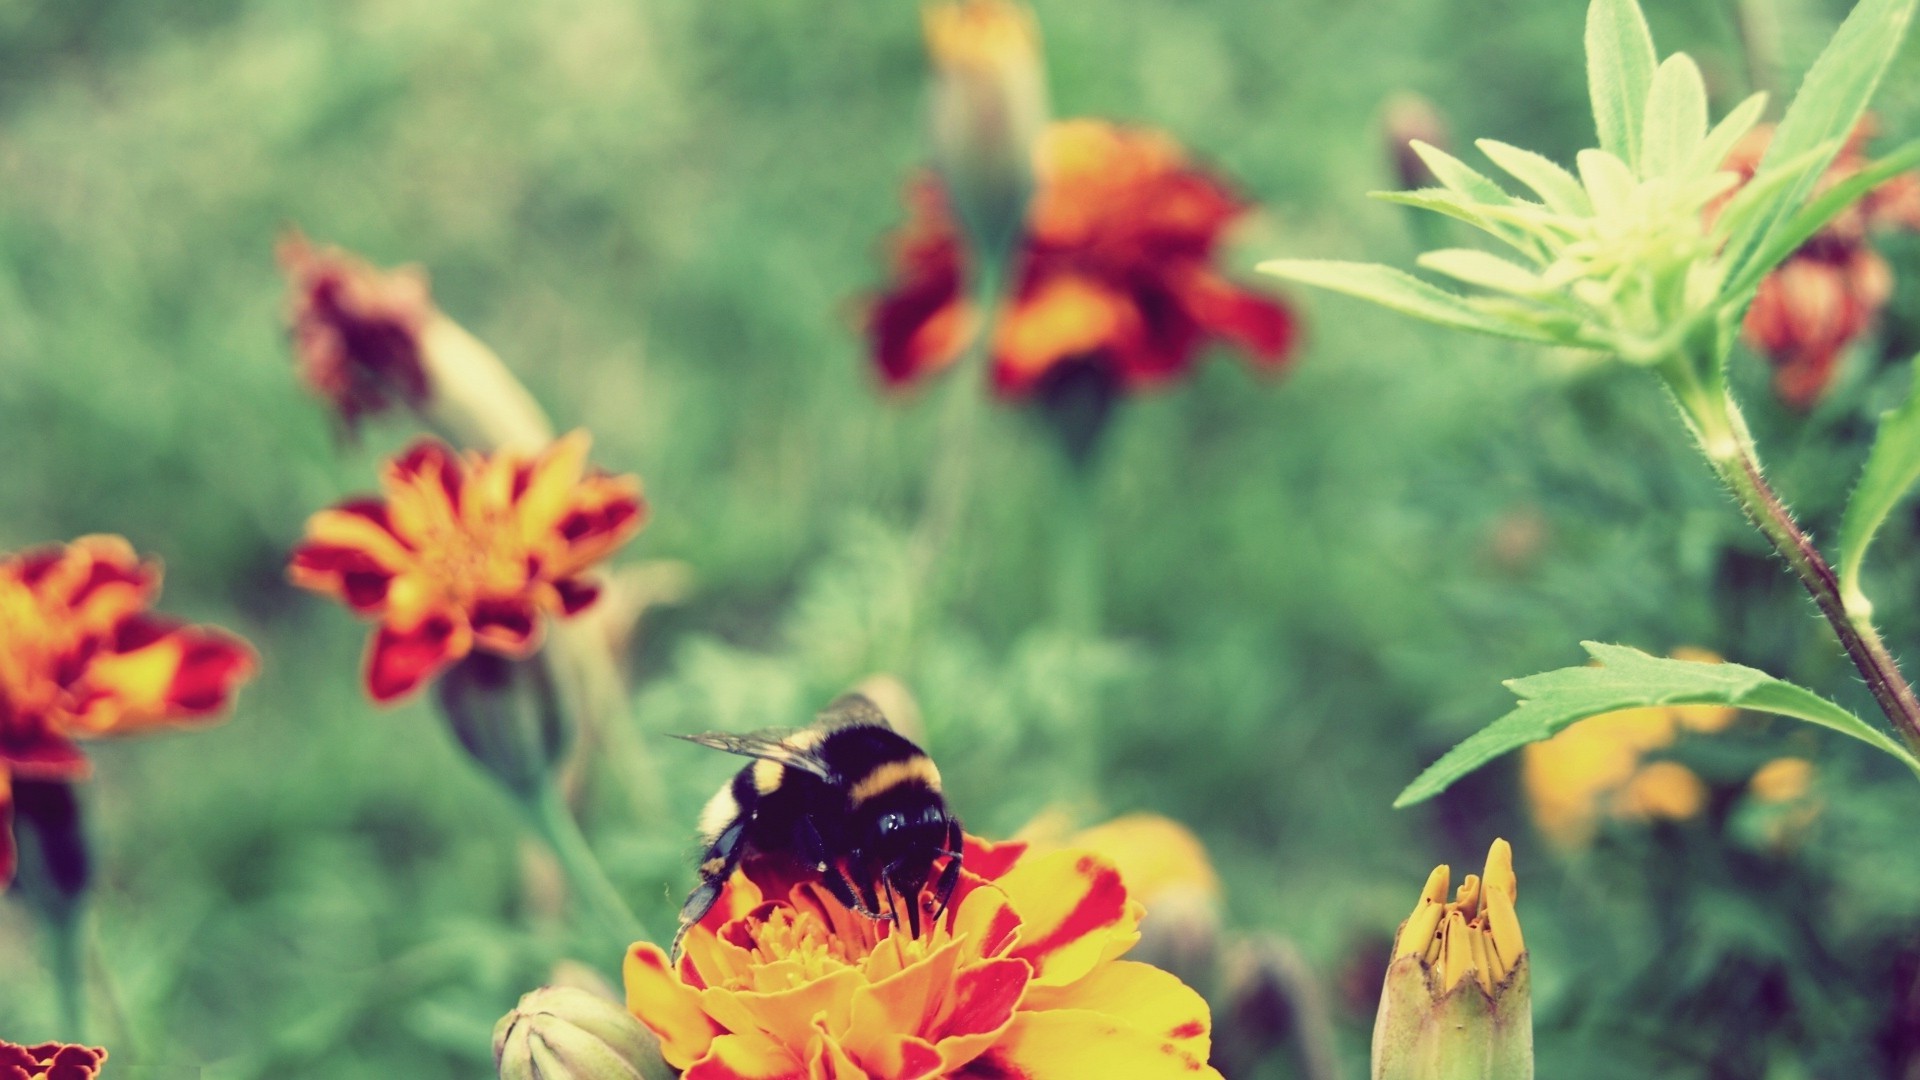 flowers, Bees, Insect, Honey, Marigolds Wallpaper